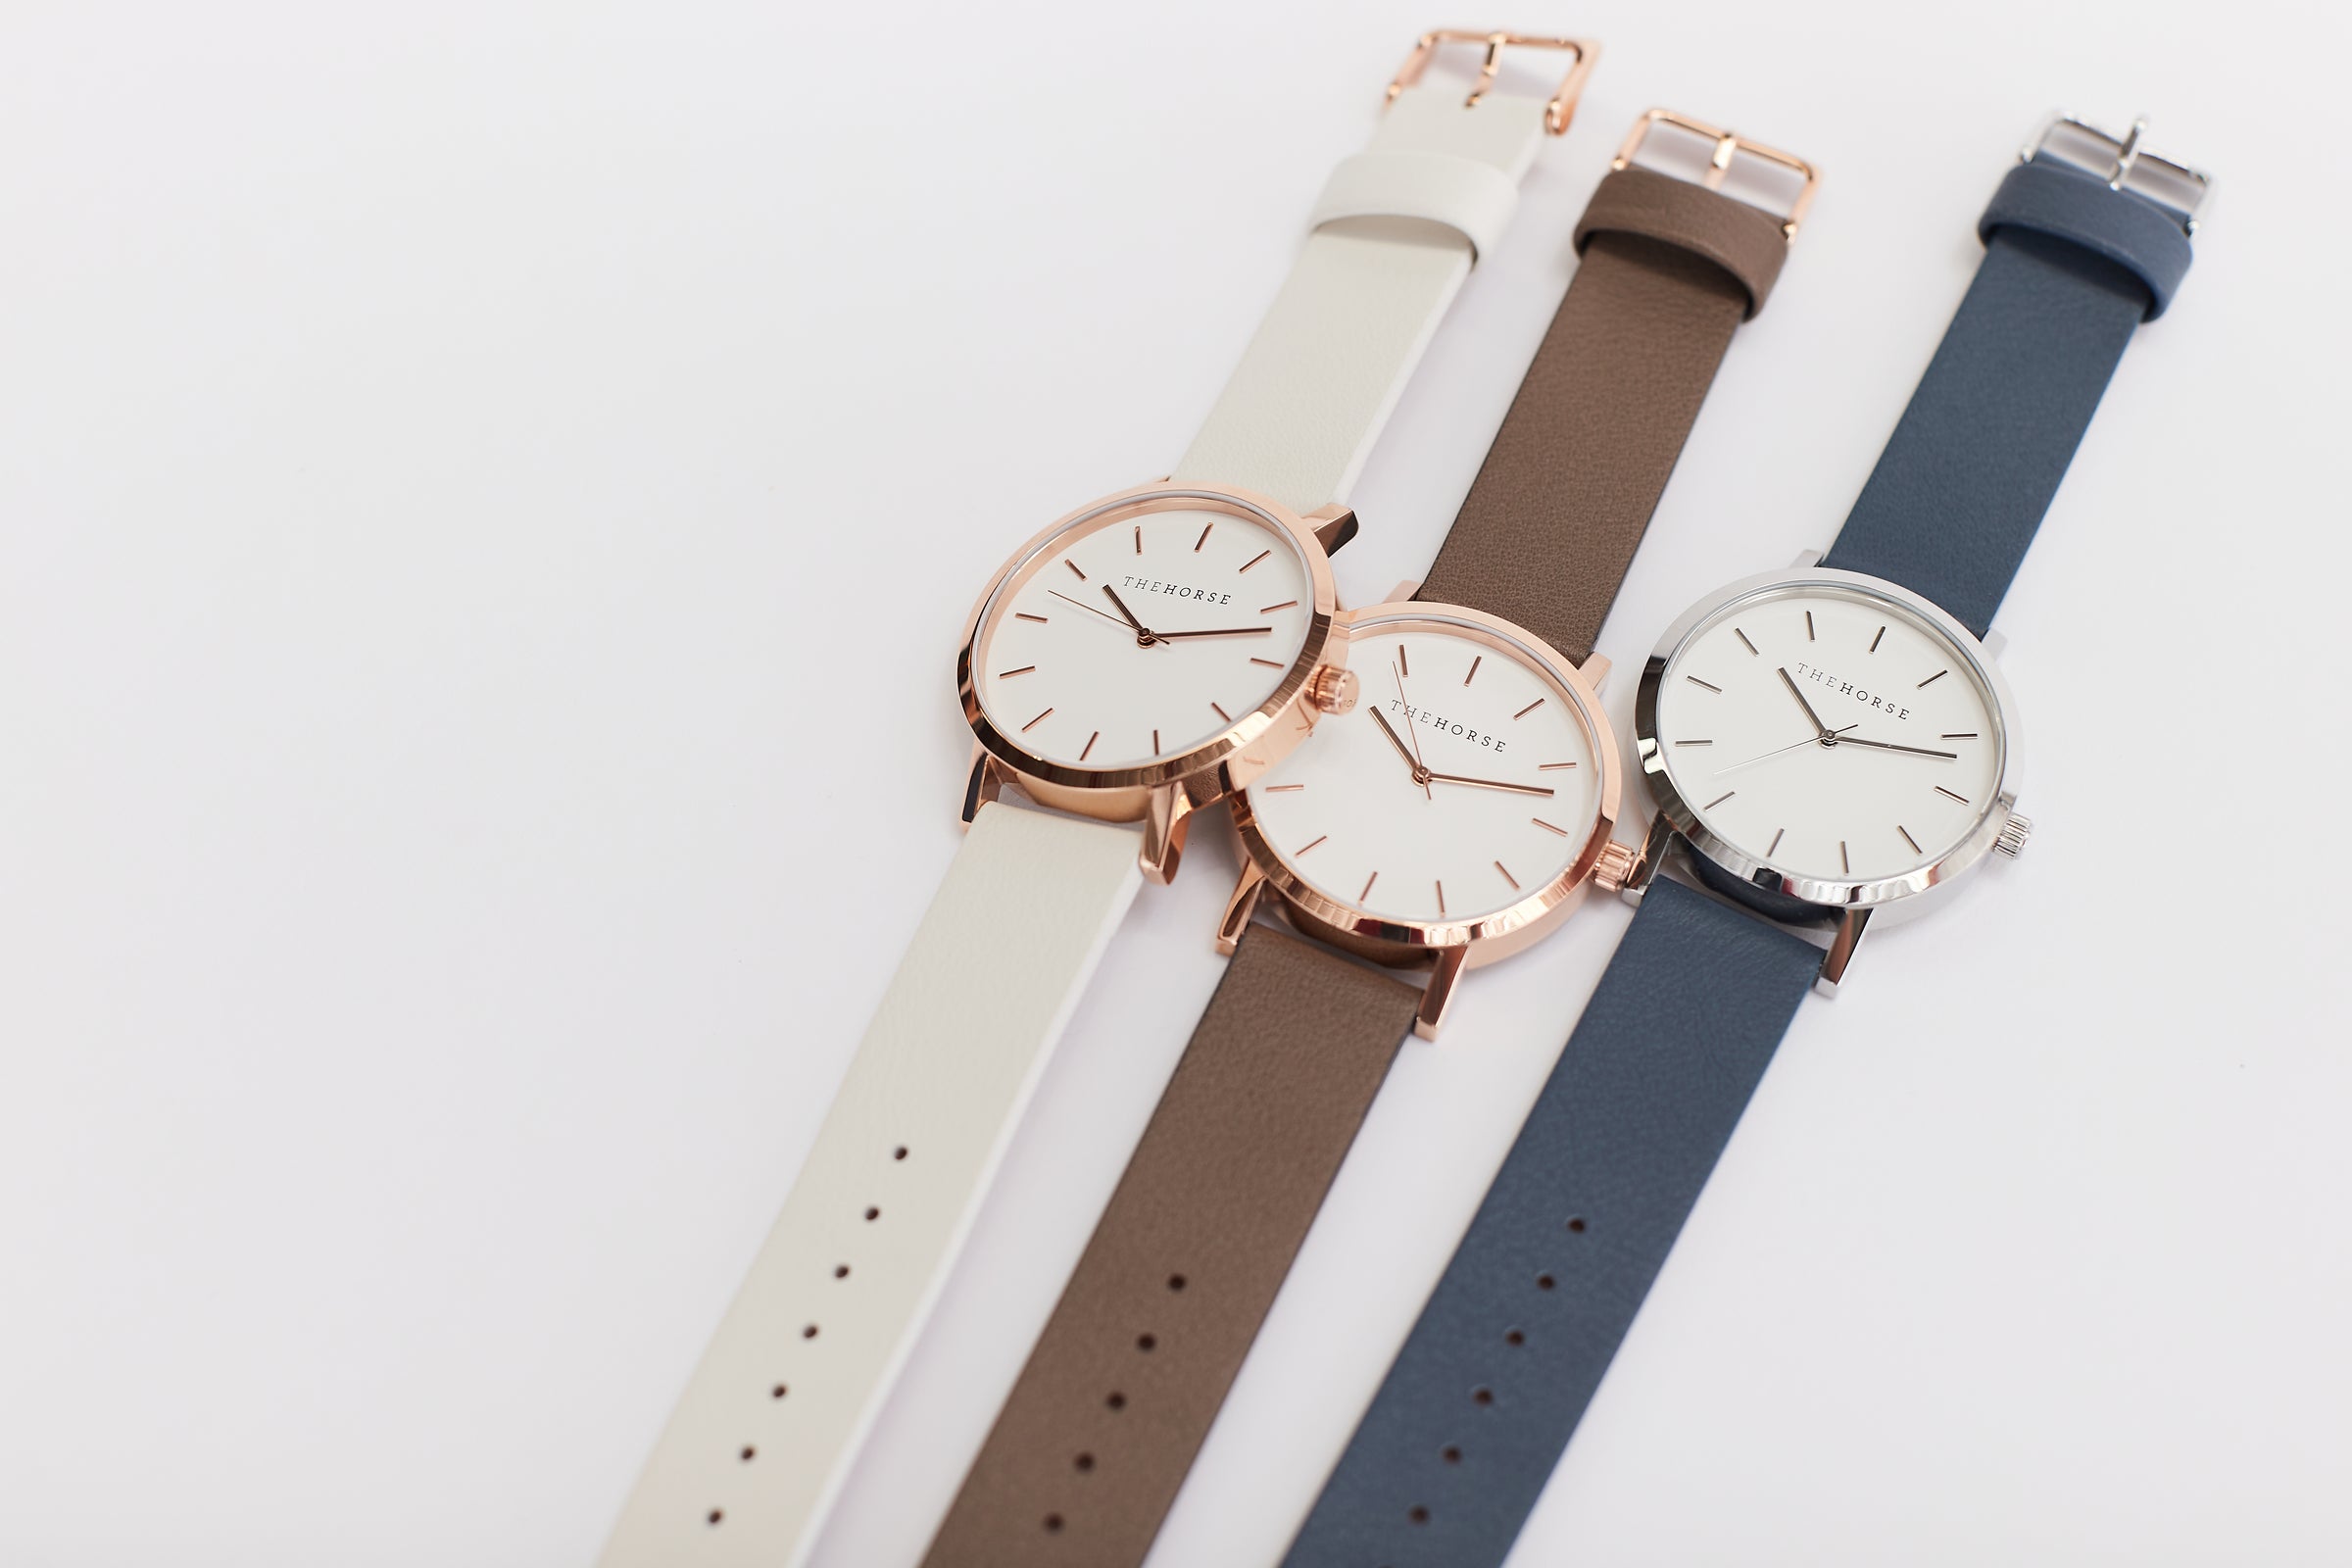 The Original: Polished Rose Gold / White Face / Milk Leather